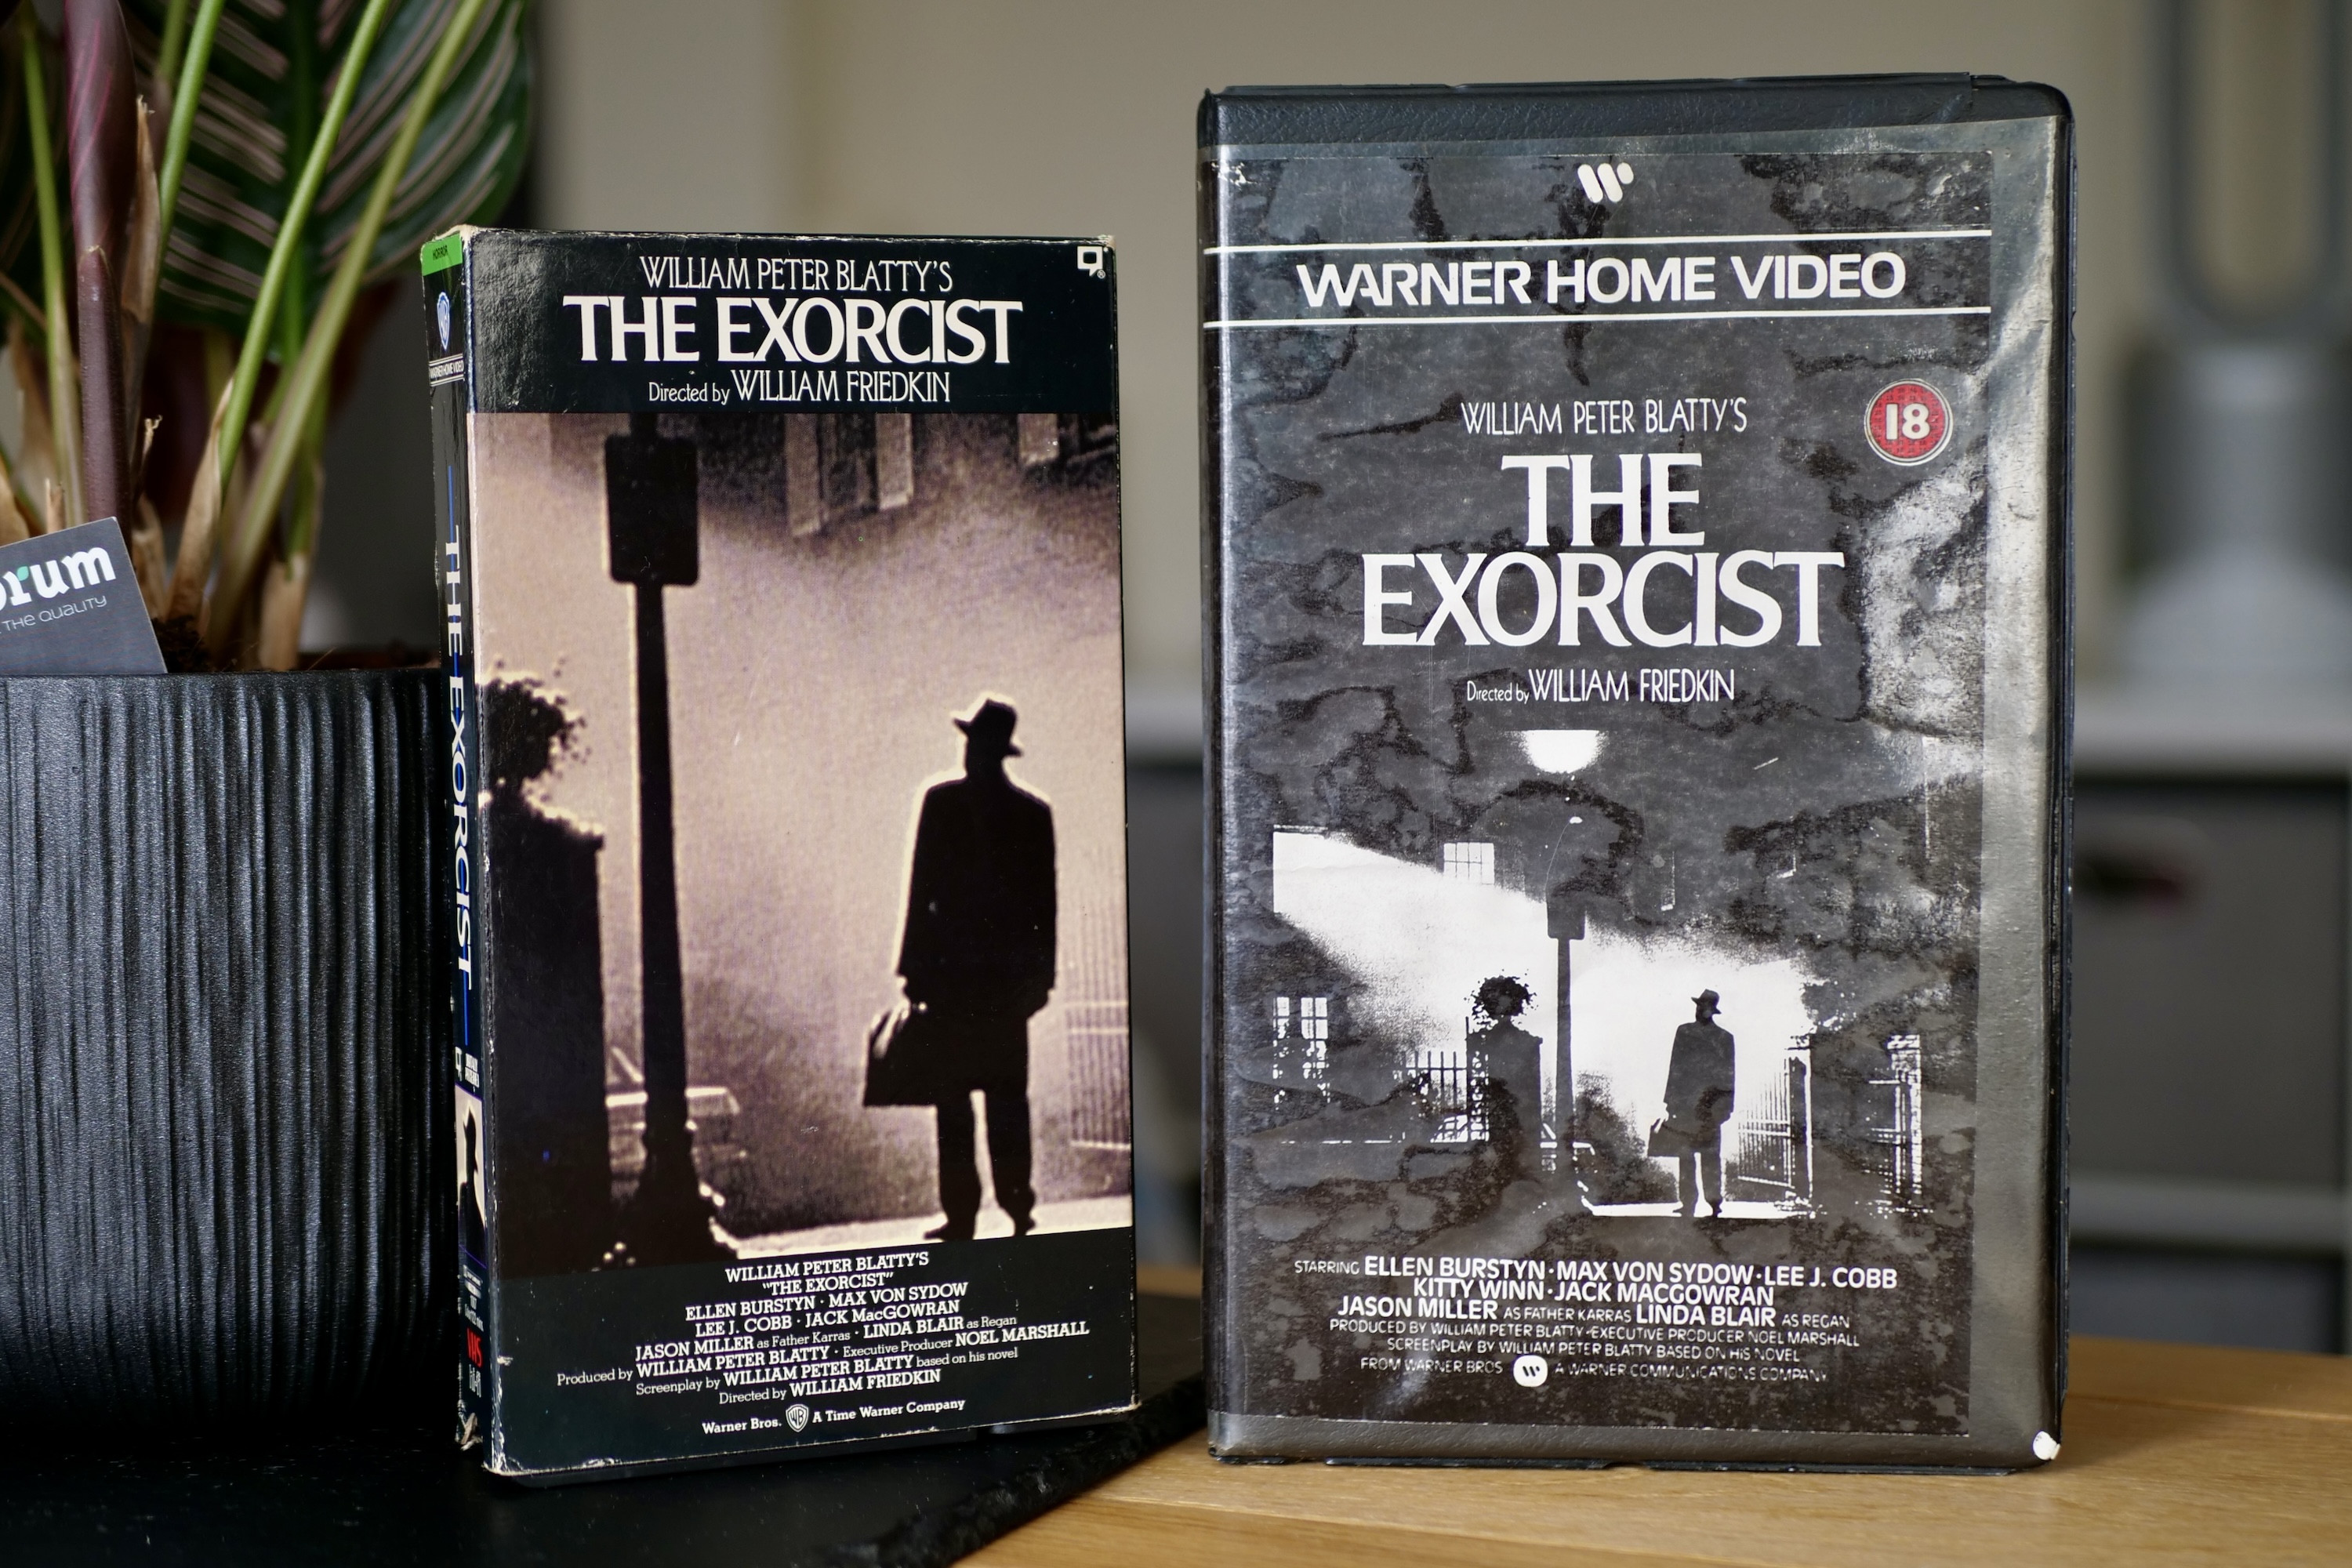 The front covers of Exorcist VHS boxes.